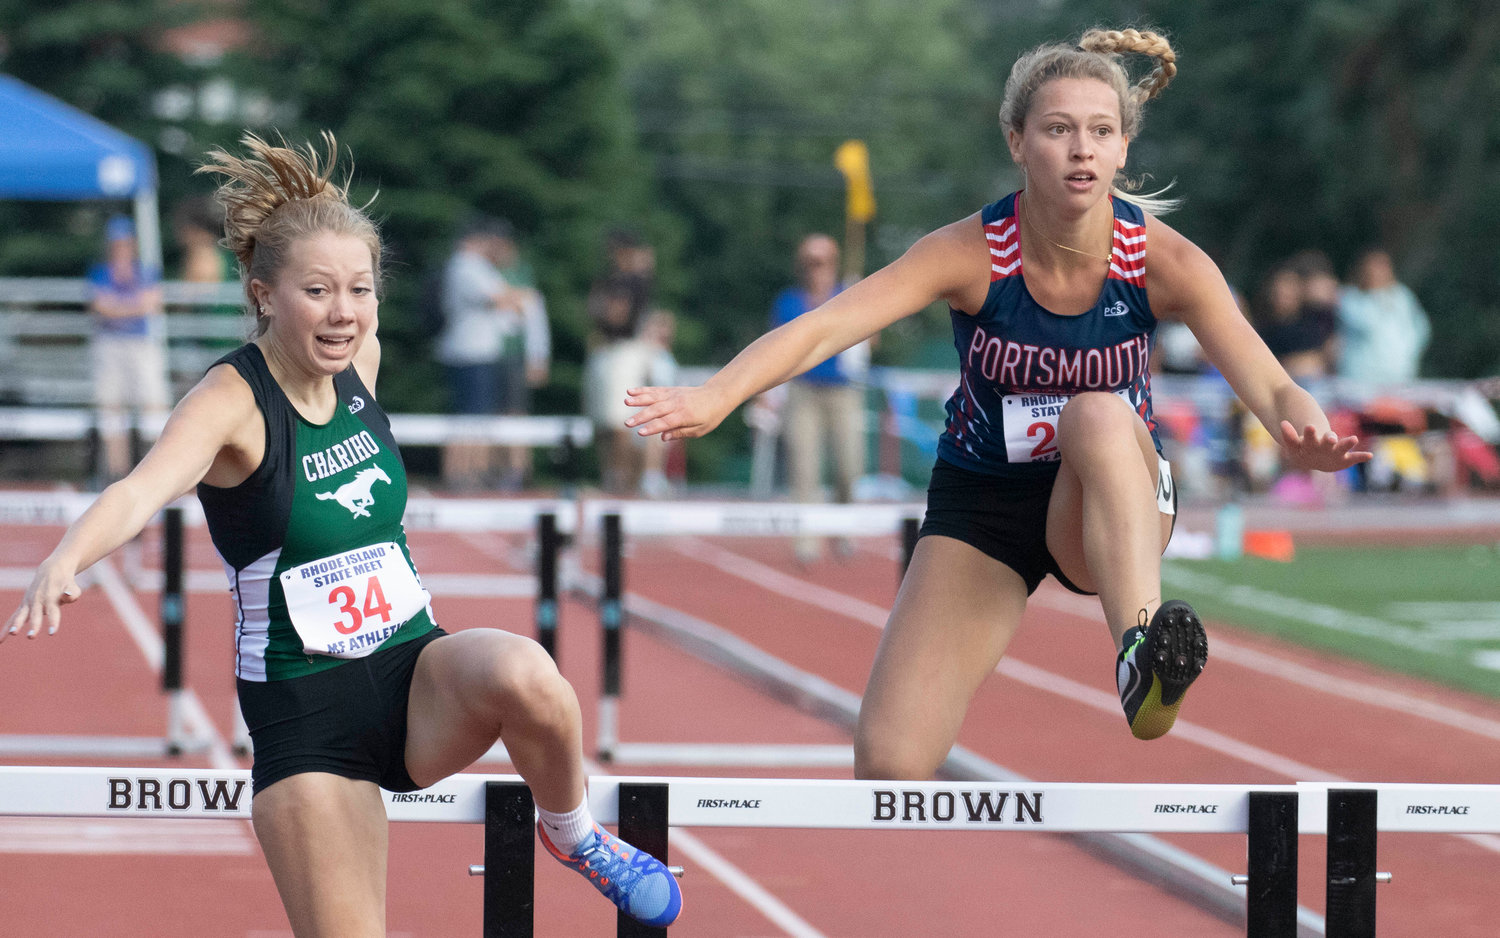 Marin Goodfriend (right) completes in a hurdles event.